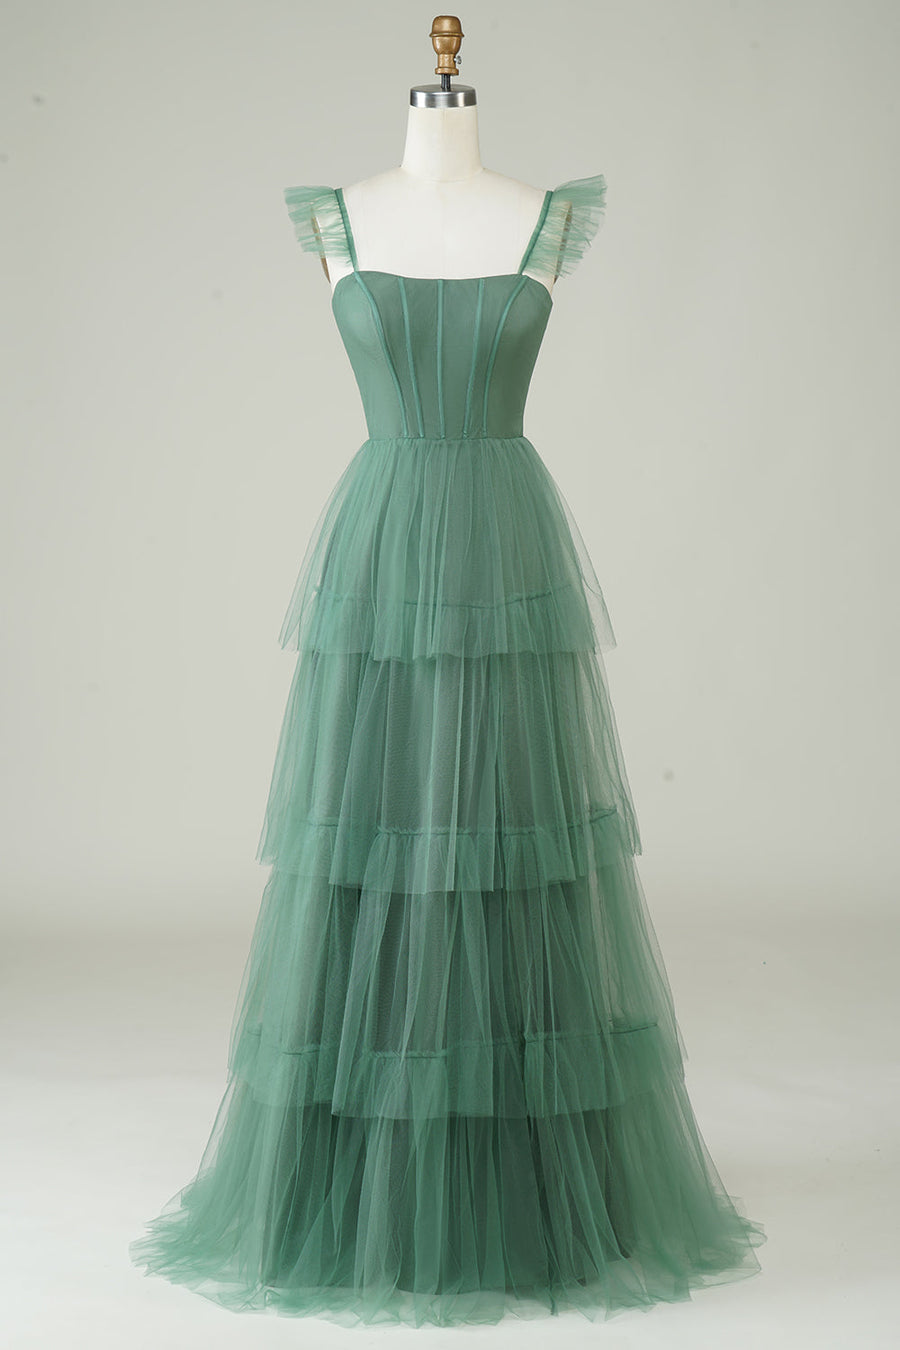 Tiered A-Line Long Prom Dress with Flutter Sleeves in green